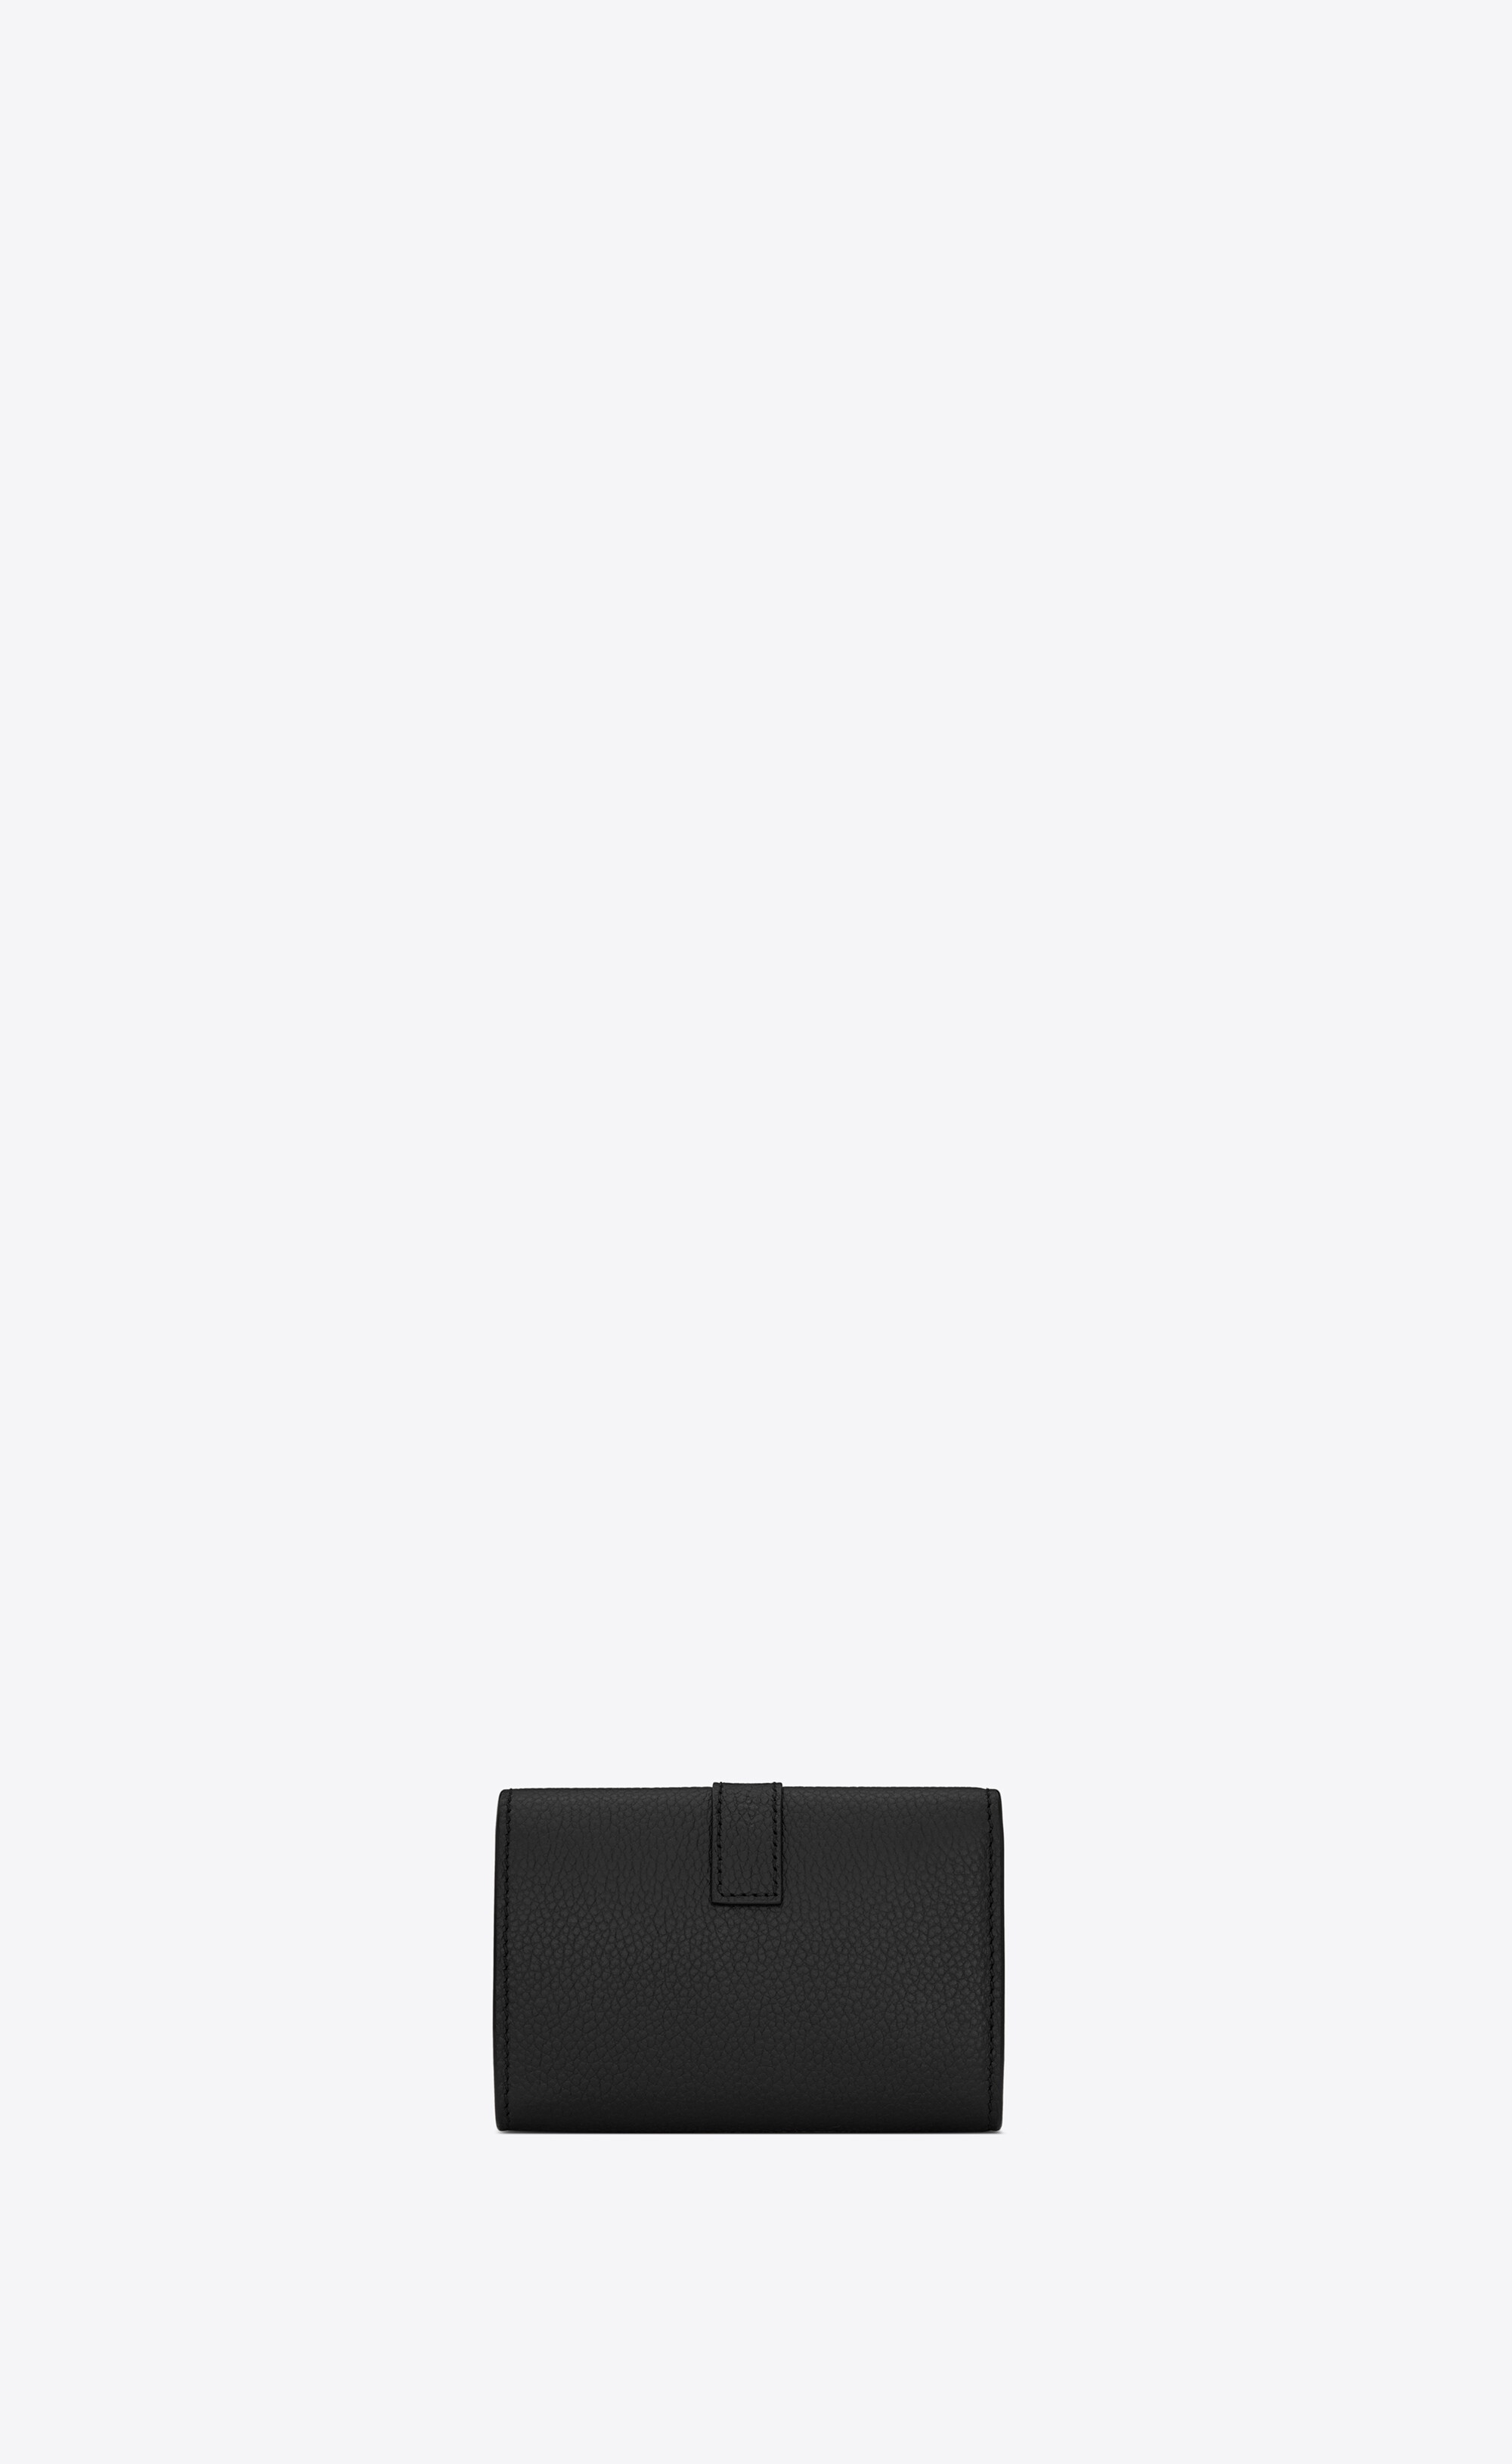 ysl line key case in grained leather - 2